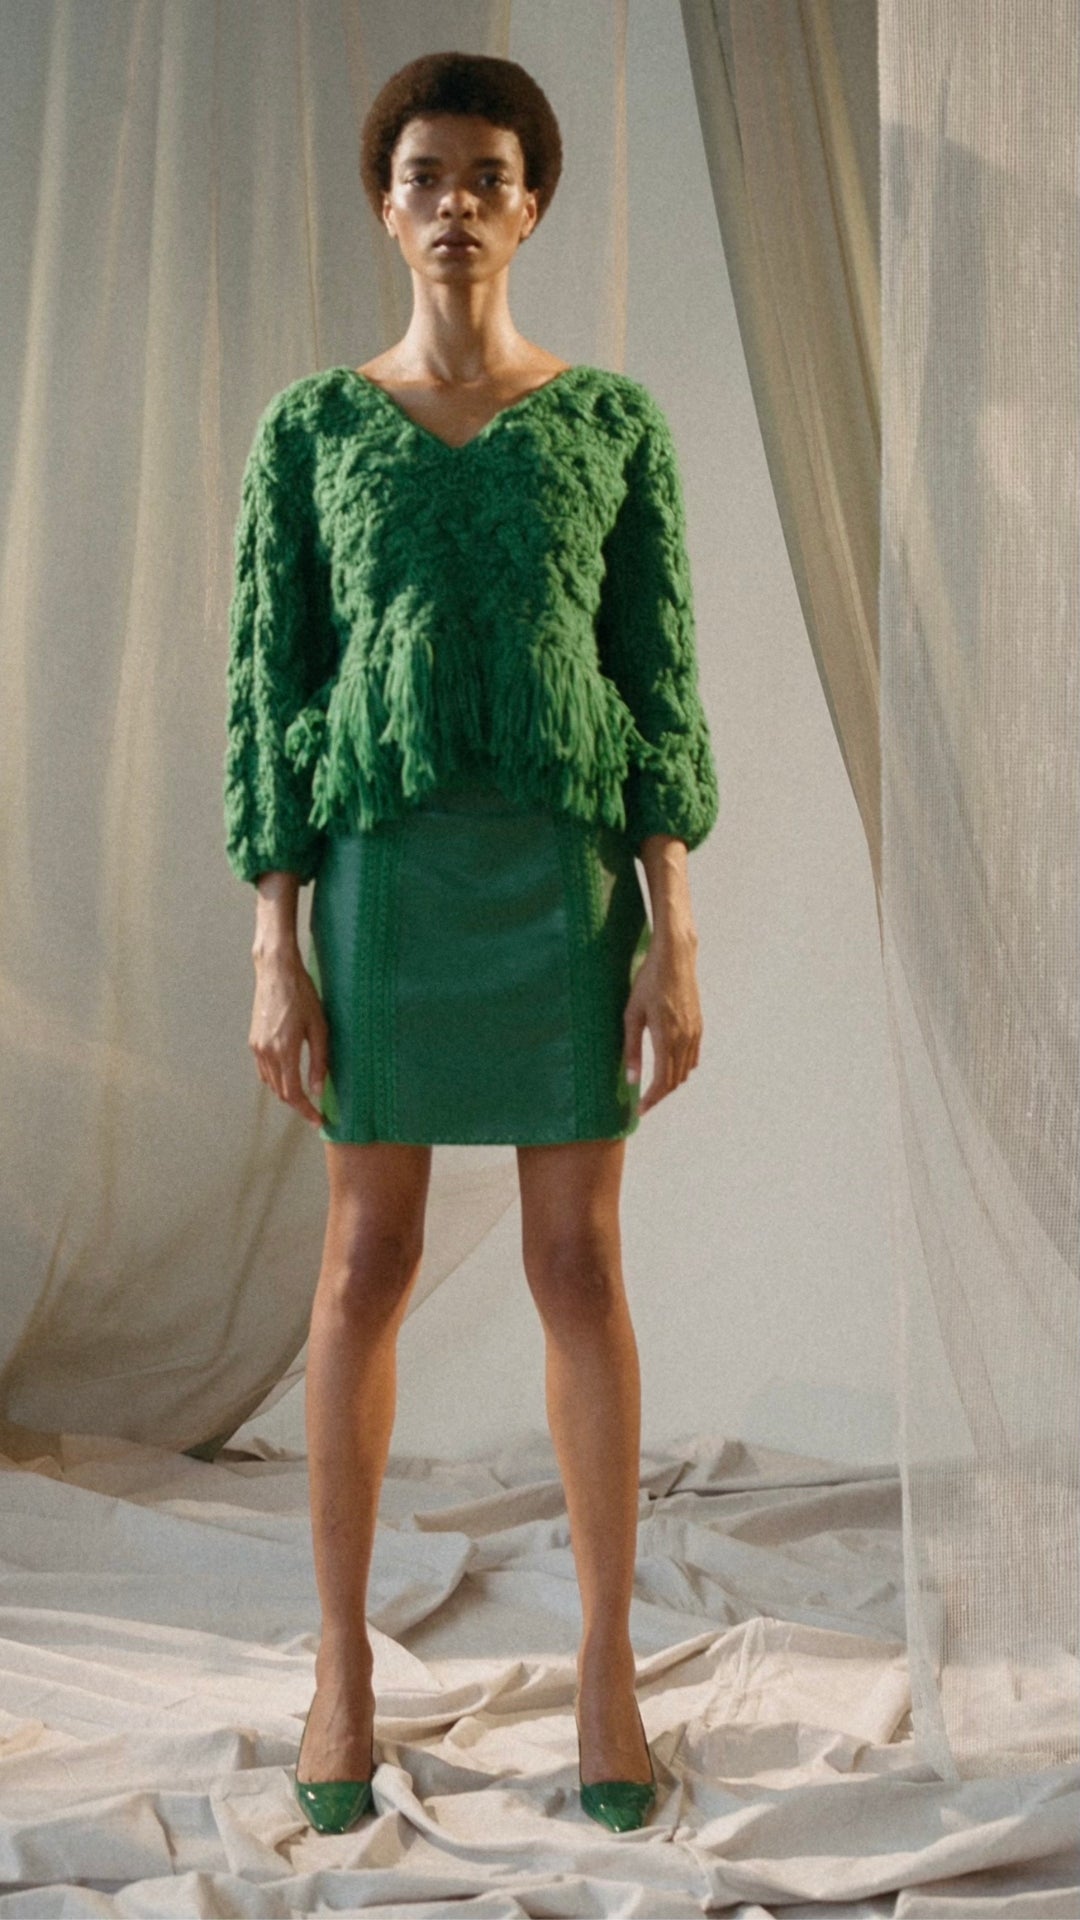 Alejandra Alonso Rojas Leather Mini Skirt with Crochet Seams. Crafted in super soft lamb leather with front and back silk crochet seams in a kelly green. The skirt is shown on the model facing forward.